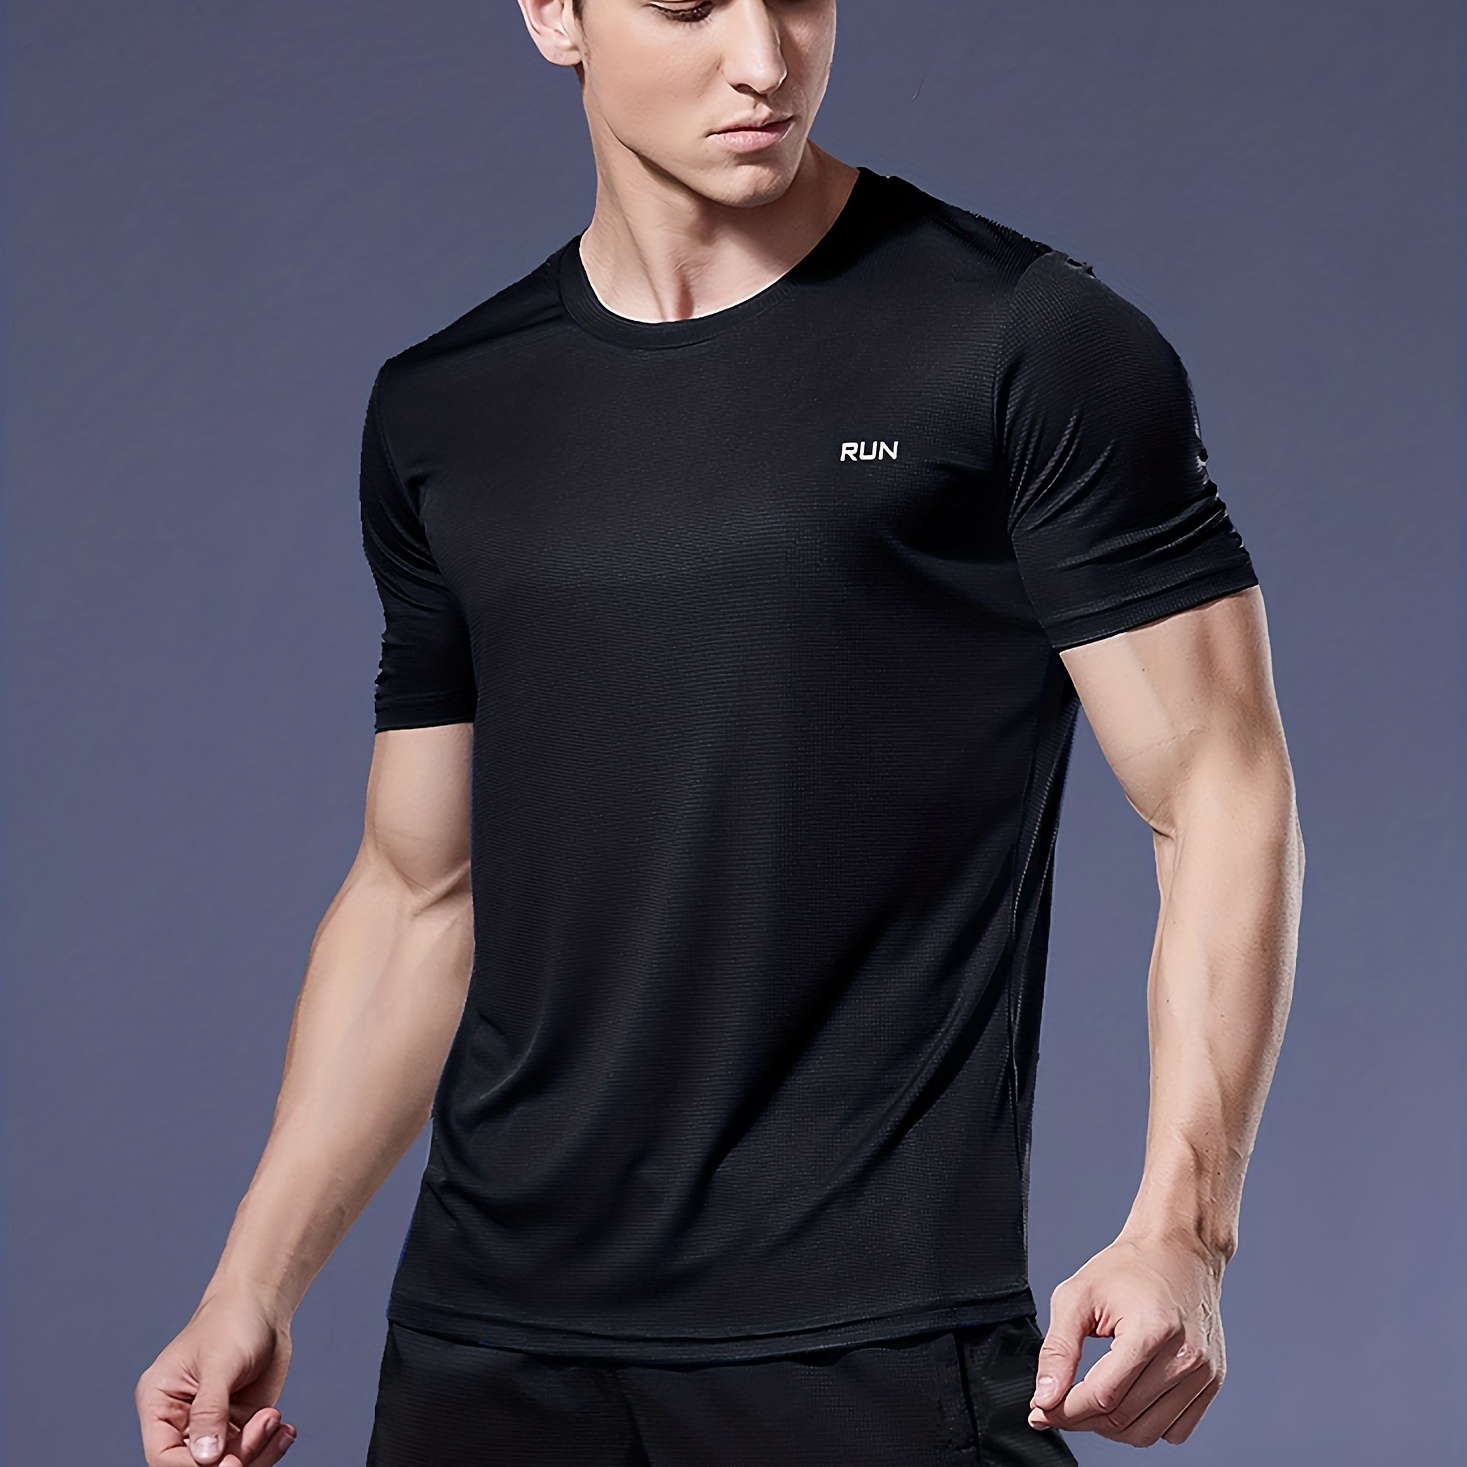 

Ultralight Quick Dry Sport T-shirt For Men - Breathable And Lightweight Top For Fitness, Training, Running, And Gym Workouts